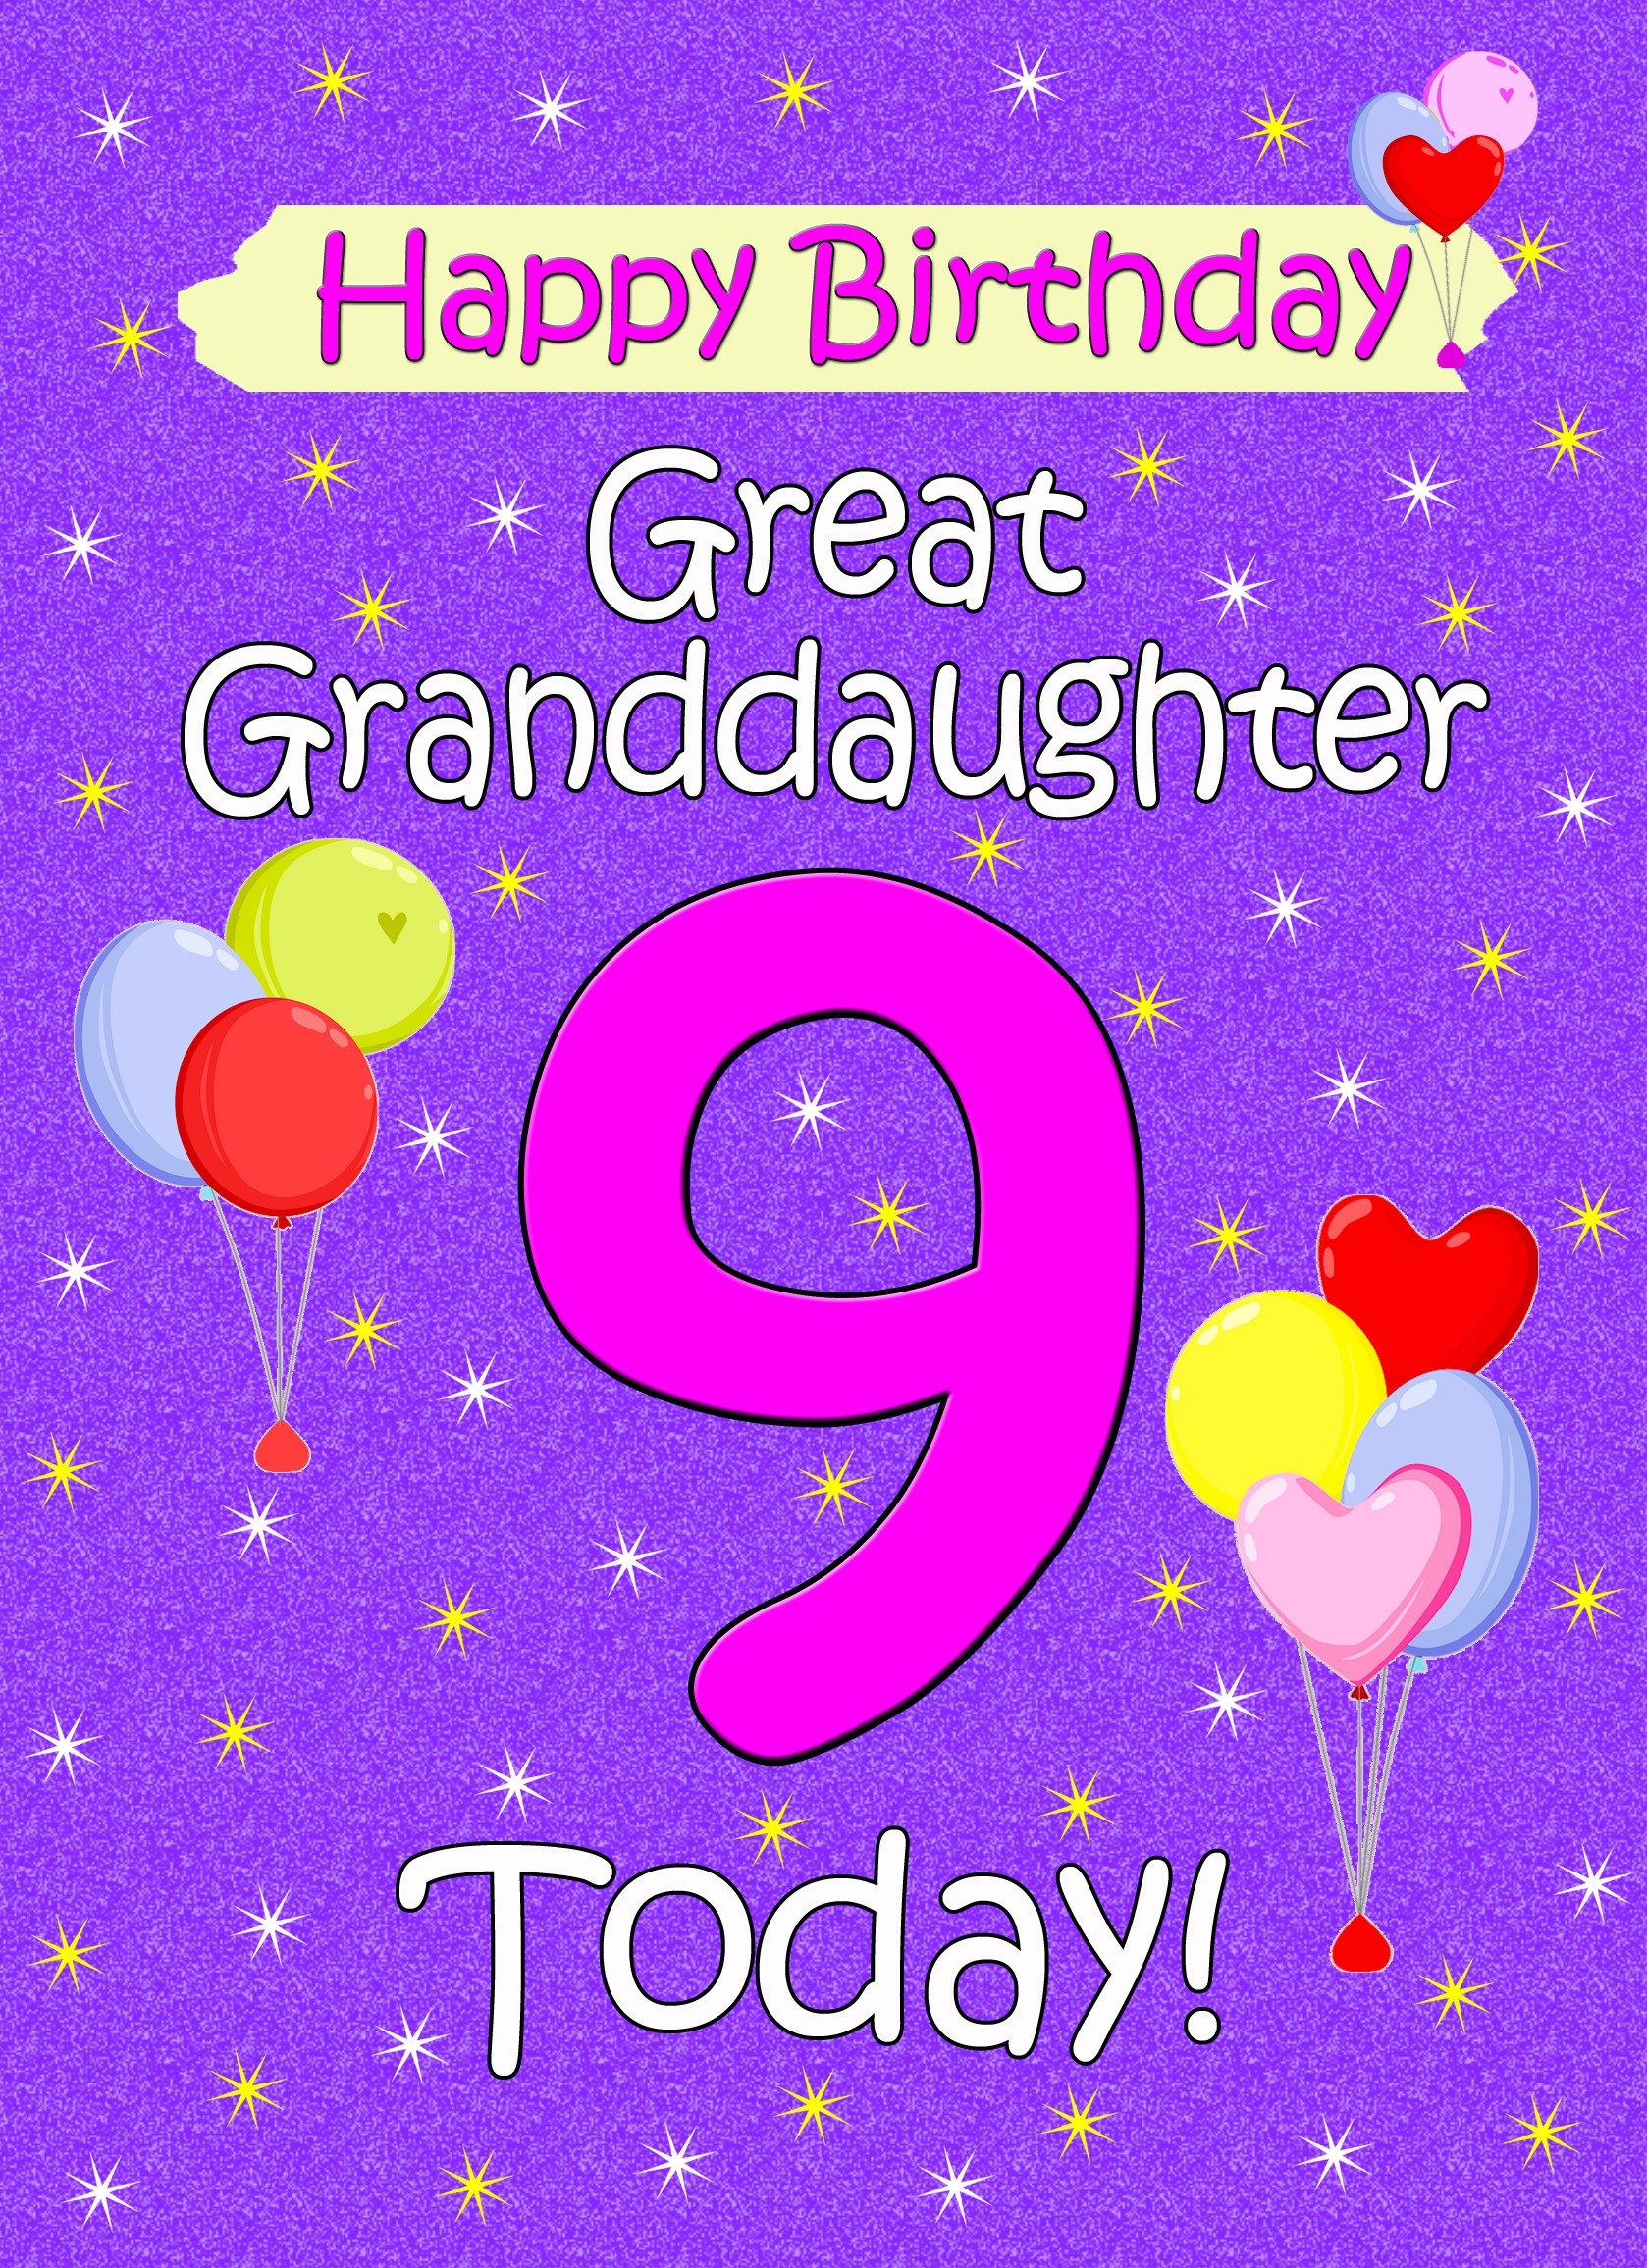 Great Granddaughter 9th Birthday Card (Lilac)